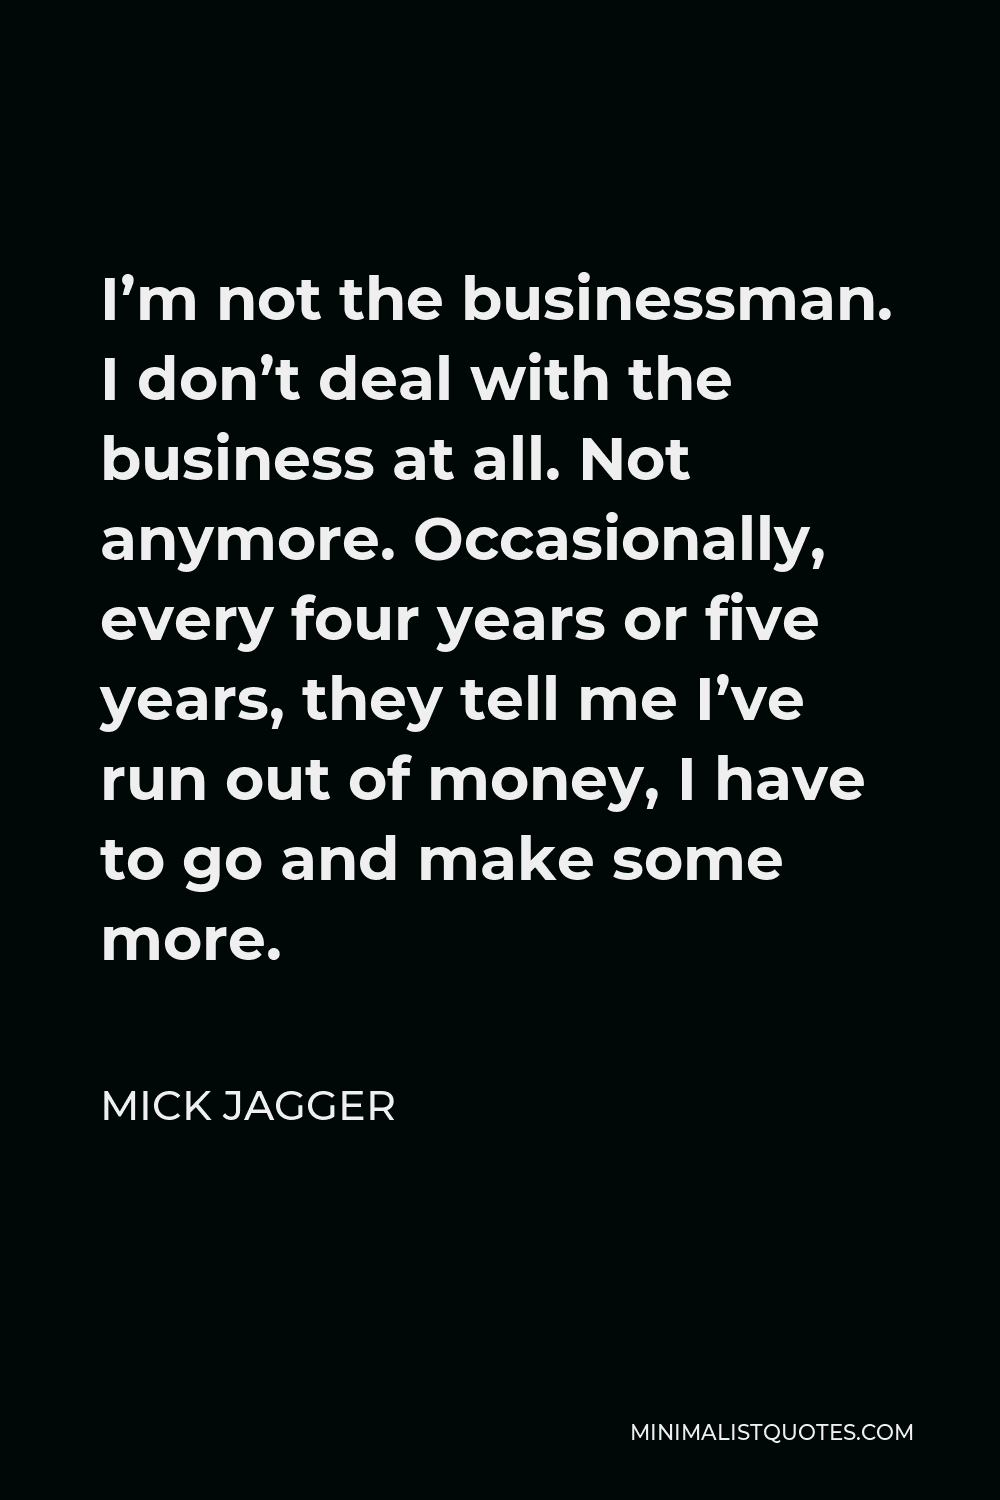 Mick Jagger Quote - I’m not the businessman. I don’t deal with the business at all. Not anymore. Occasionally, every four years or five years, they tell me I’ve run out of money, I have to go and make some more.